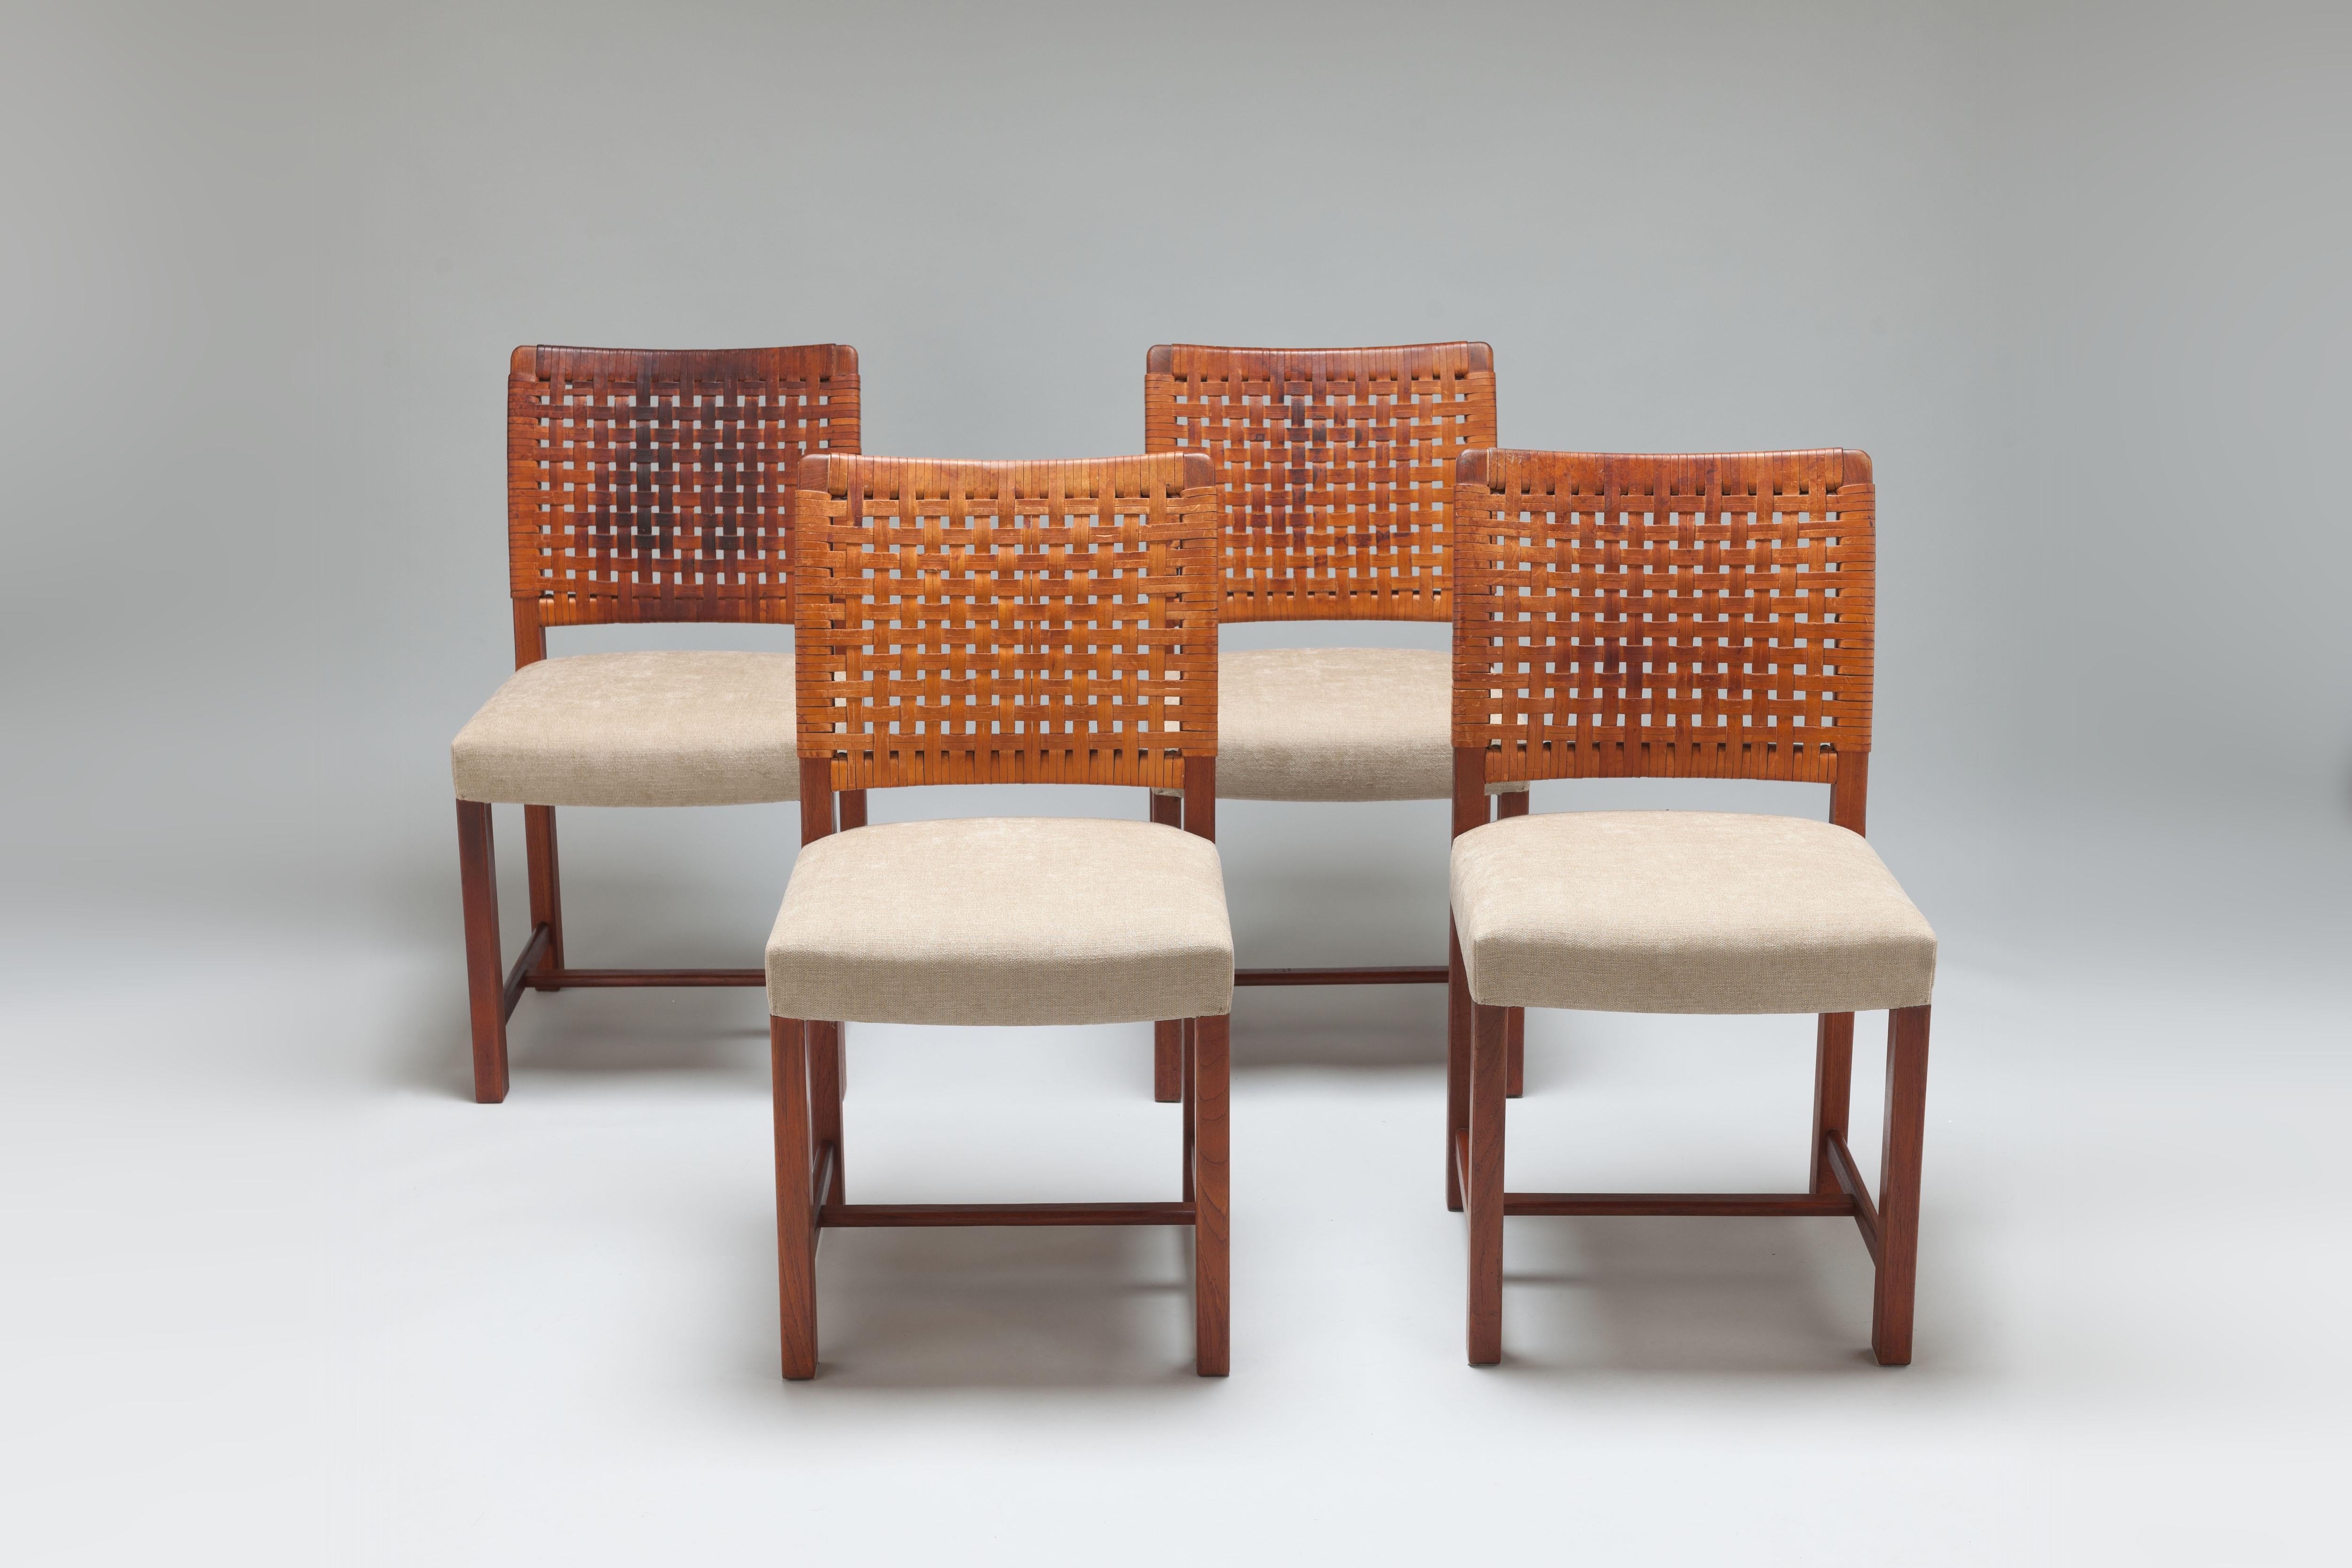 Early set of 4 vintage Näyttely chairs by Carl Gustaf Hiort af Ornäs in solid teak with natural leather braided back in original condition.

The Näyttely was commissioned by Finnish designer Carl Gustaf Hiort af Ornäs in 1955 for Finnish